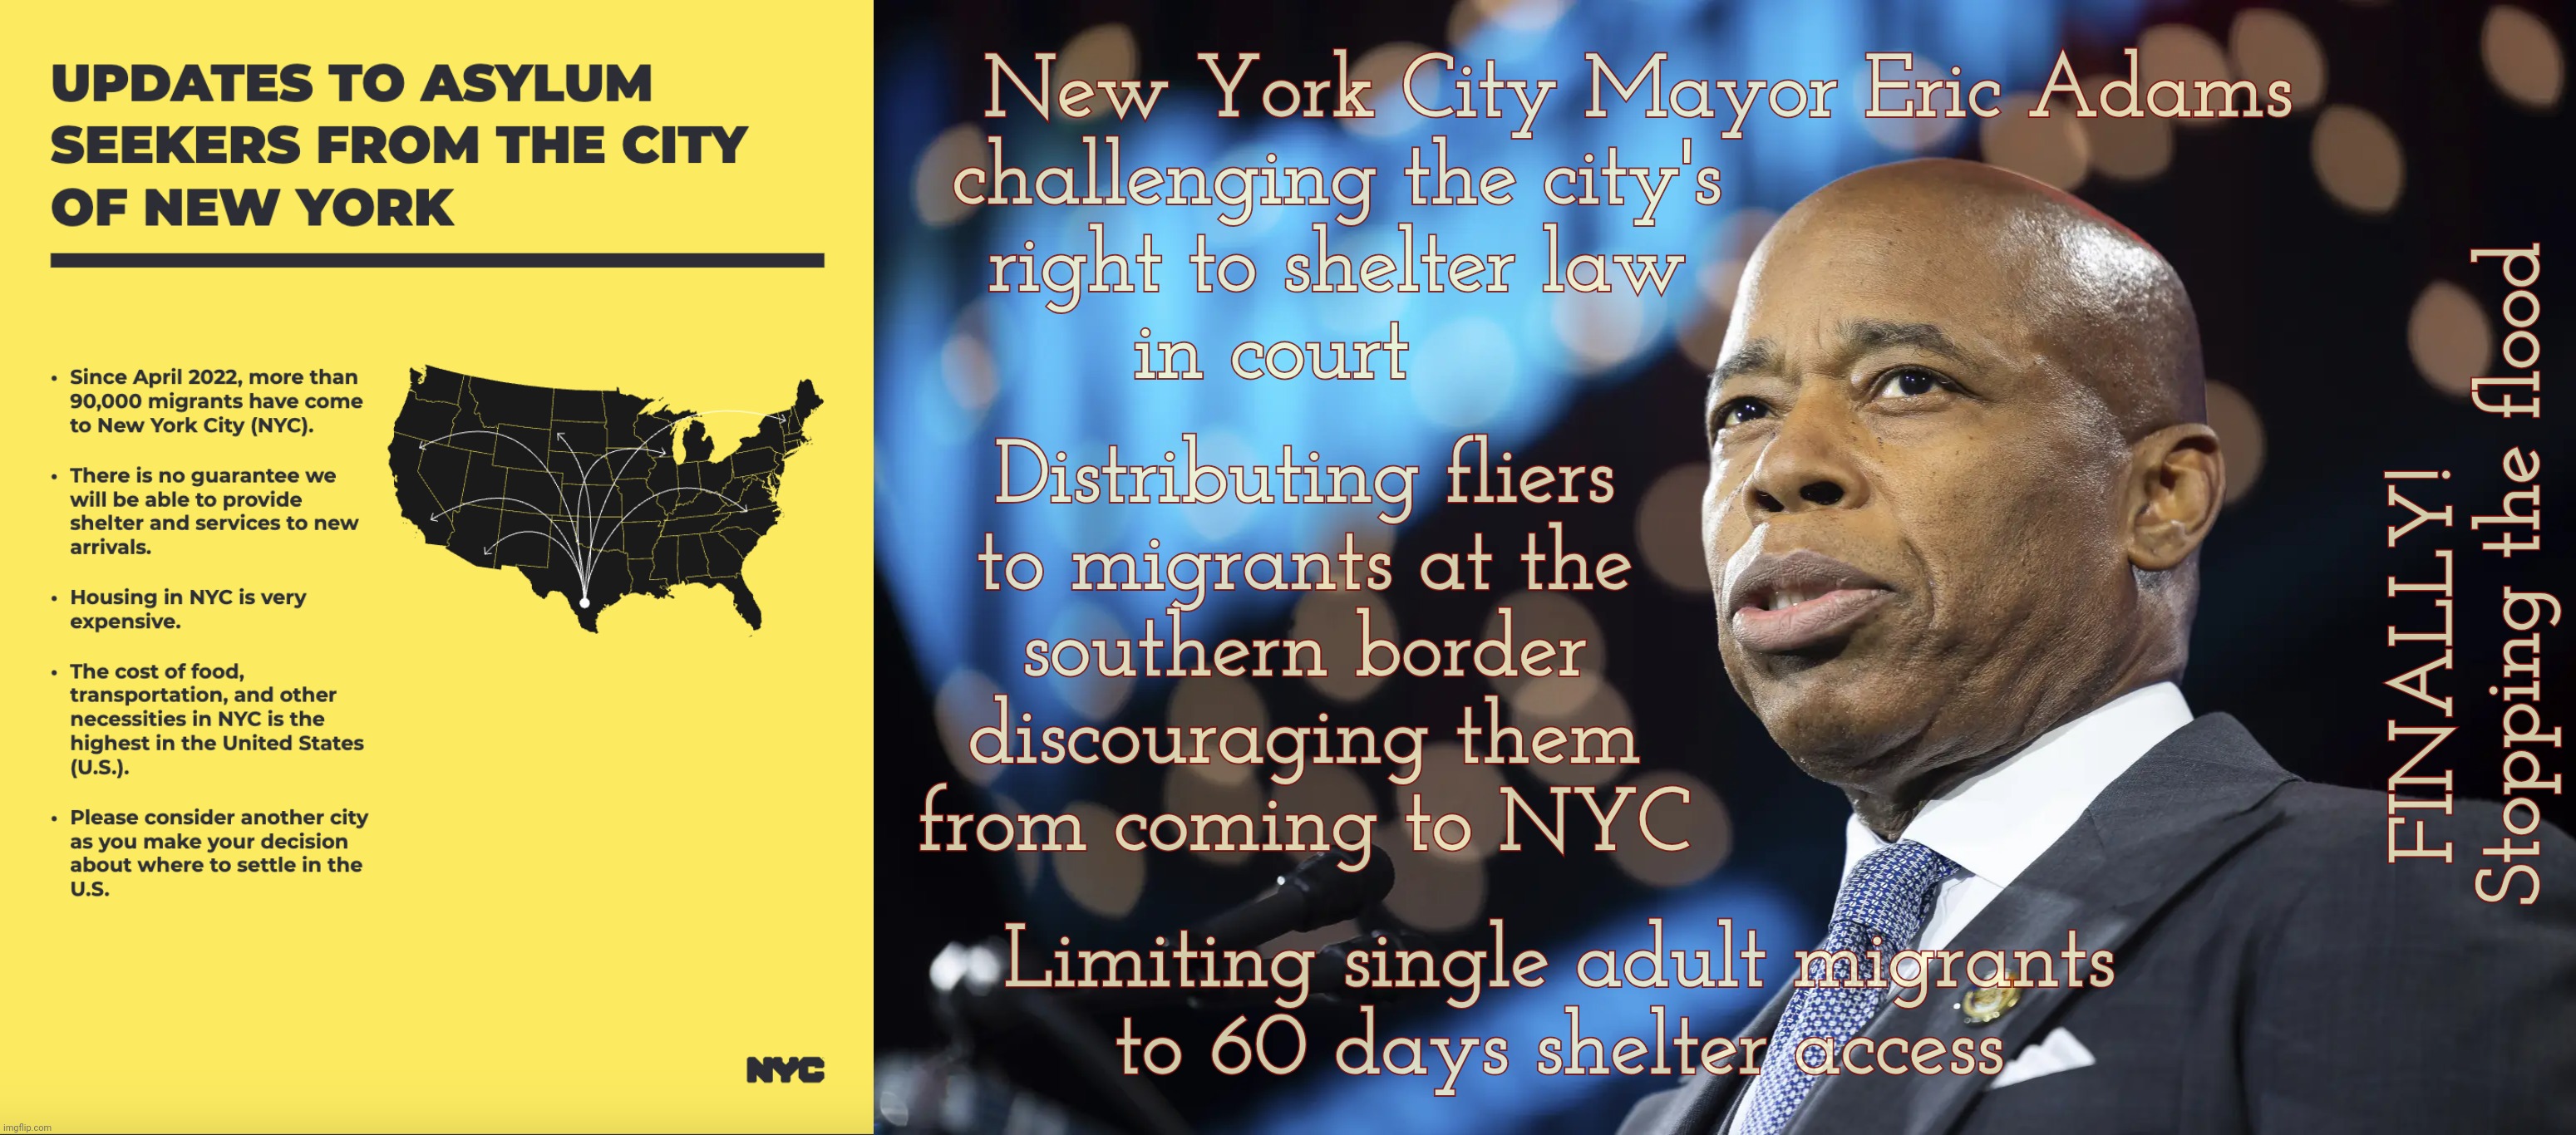 We can't even help our own citizens but we roll out the red carpet for those who chose the wrong dictators | New York City Mayor Eric Adams
challenging the city's                       
right to shelter law                       
in court; Distributing fliers
to migrants at the
southern border
discouraging them
from coming to NYC; FINALLY!       
Stopping the flood; Limiting single adult migrants
to 60 days shelter access | image tagged in nyc mayor eric adams,nyc,new york city,illegal aliens,send them back,return to sender | made w/ Imgflip meme maker